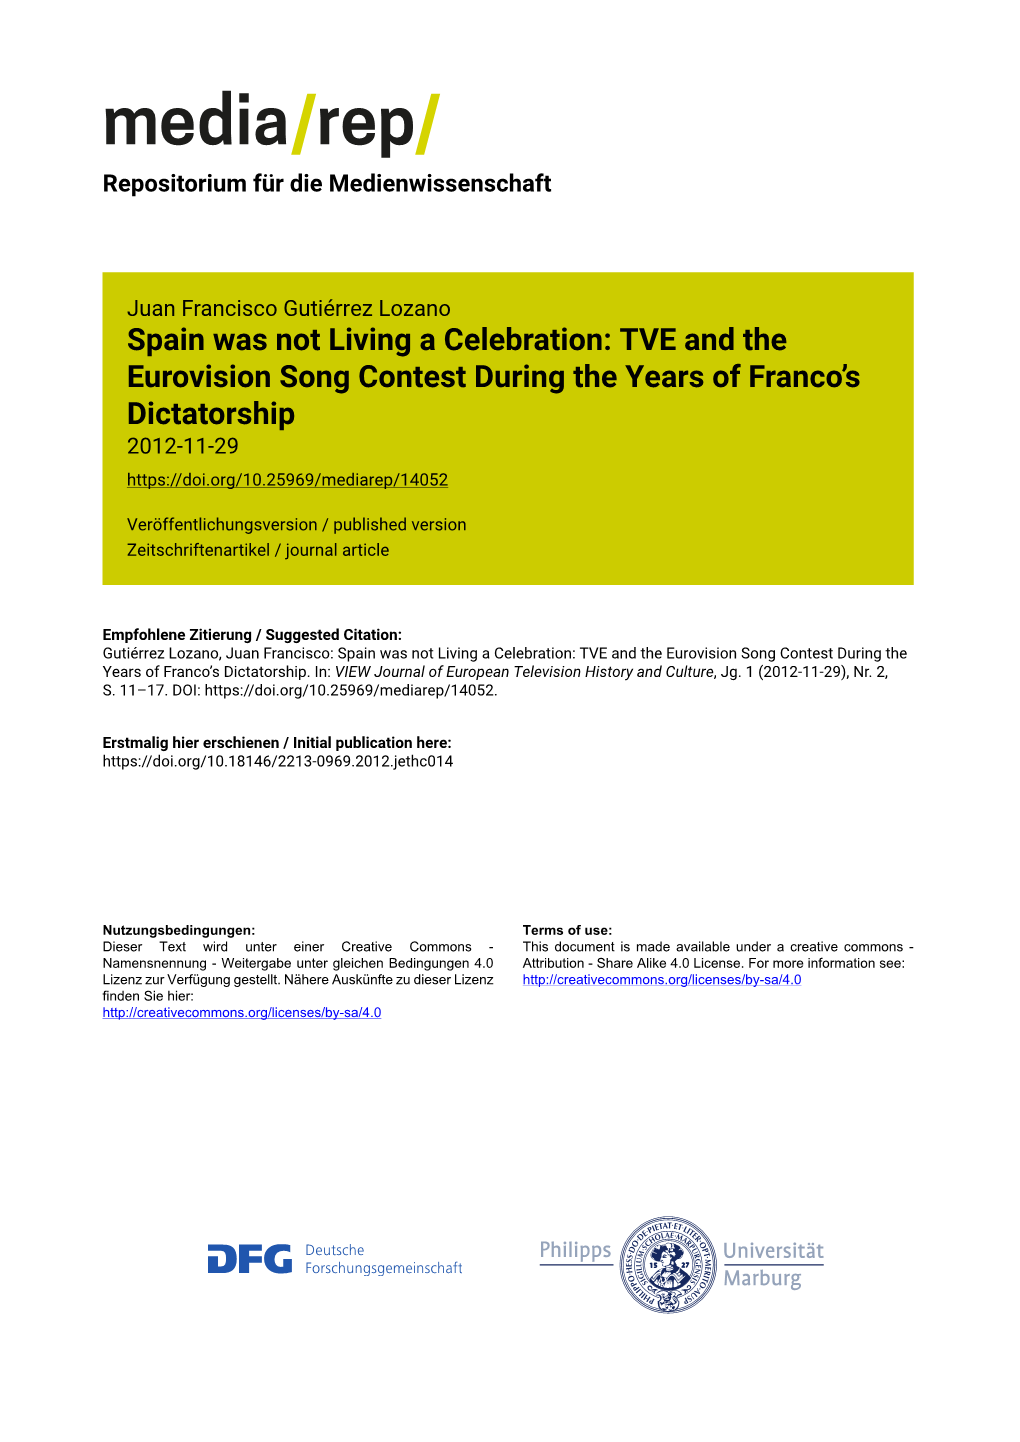 Spain Was Not Living a Celebration: TVE and the Eurovision Song Contest During the Years of Franco’S Dictatorship 2012-11-29